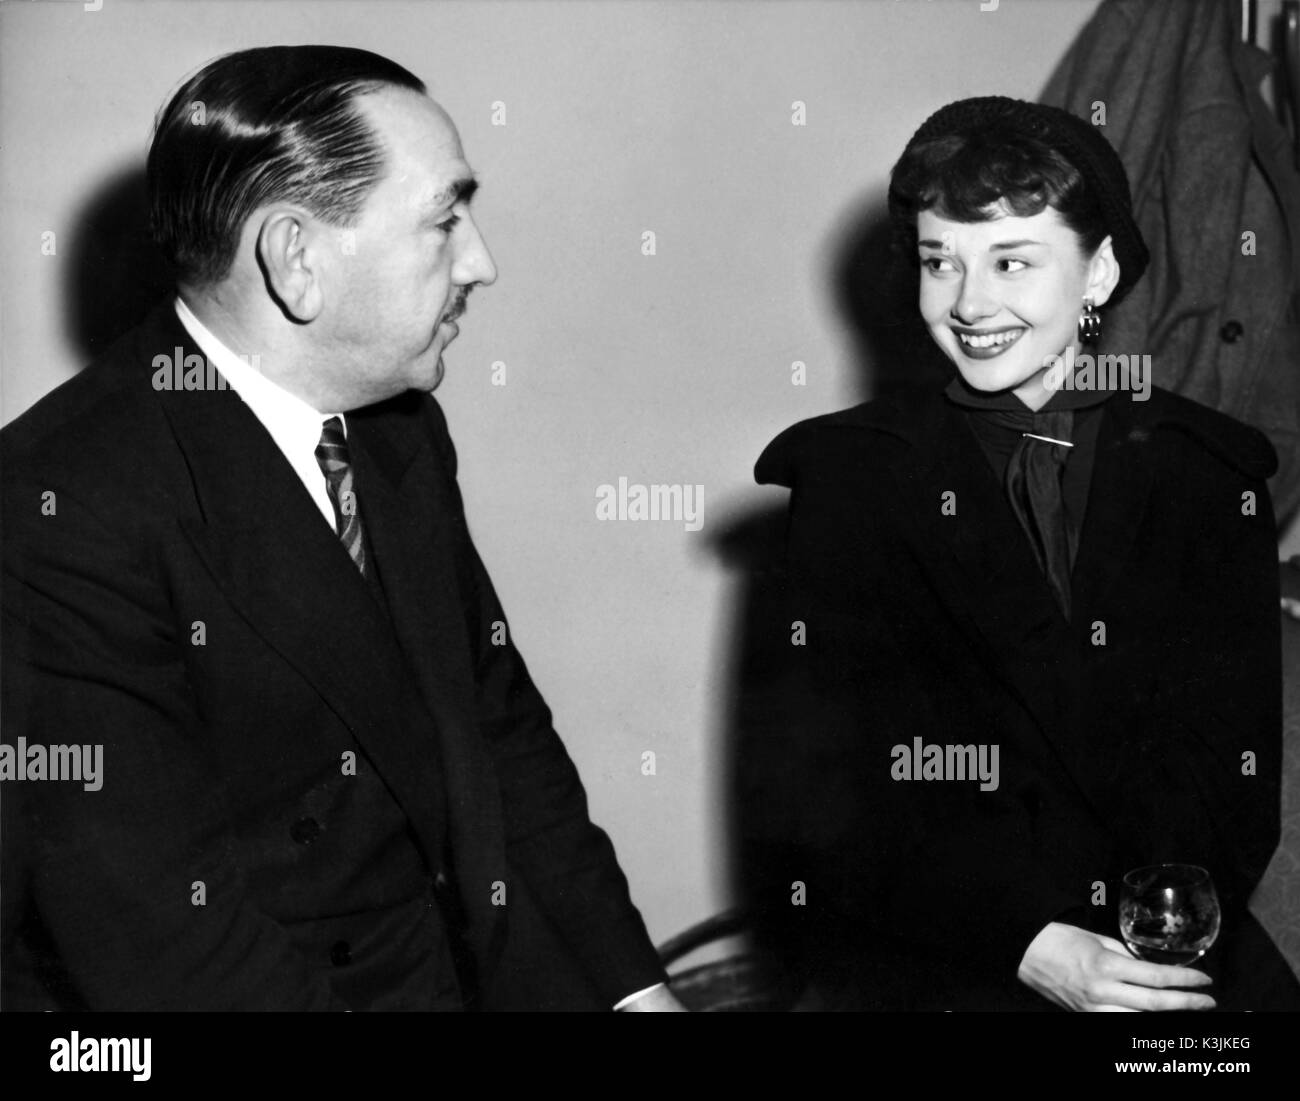 AUDREY HEPBURN [1929 - 1993] Belgian-born International Actress with ROBERT CLARK, the Executive Director of Production, Associated British Picture Corporation. Hepburn was contracted as one ABPC's artistes. (early 1950s)  AUDREY HEPBURN Stock Photo